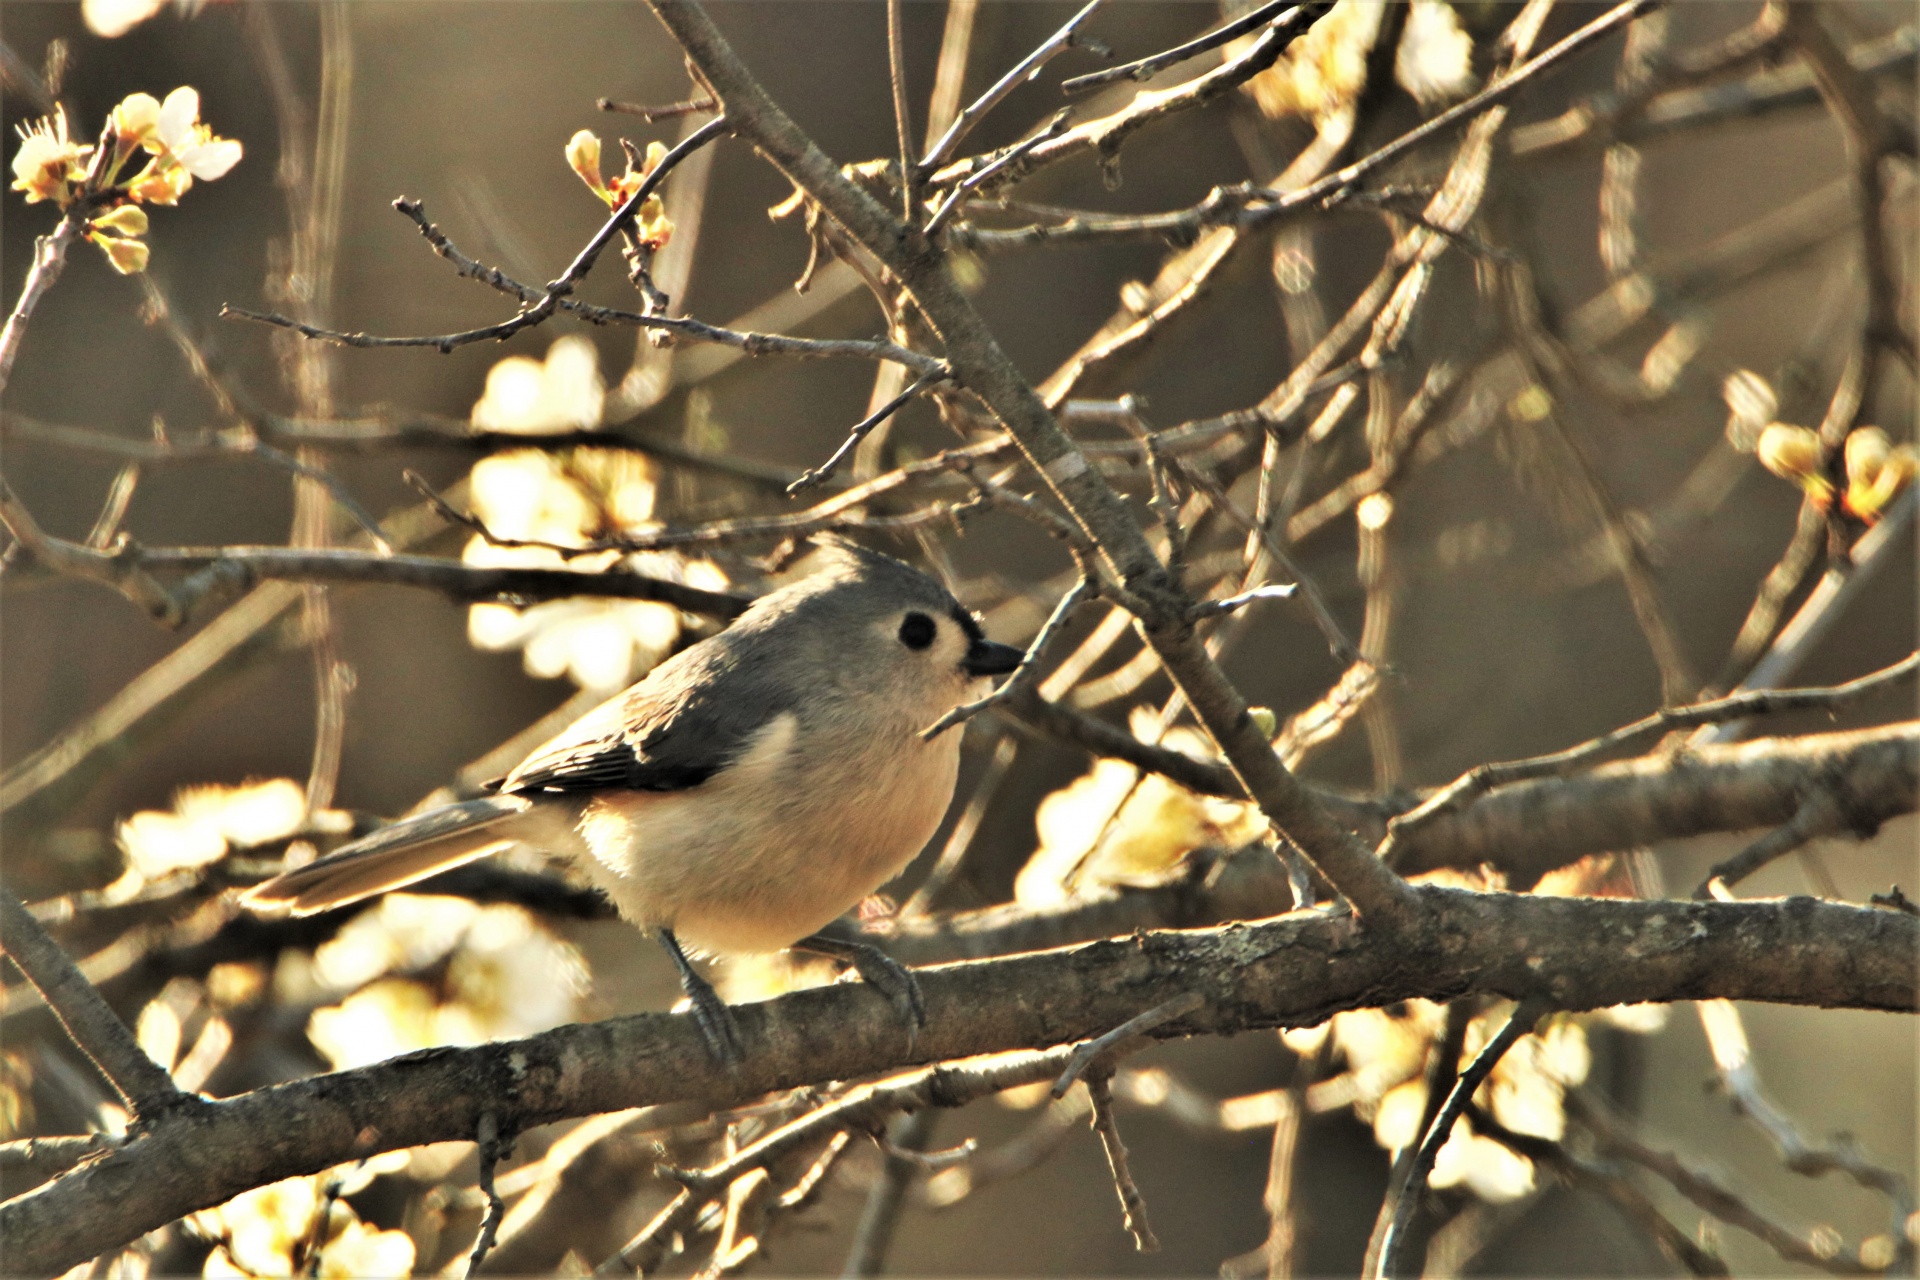 Close-up of a cute little tufted titmouse bird perched on a tree branch surrounded by white tree blossoms in early morning light.